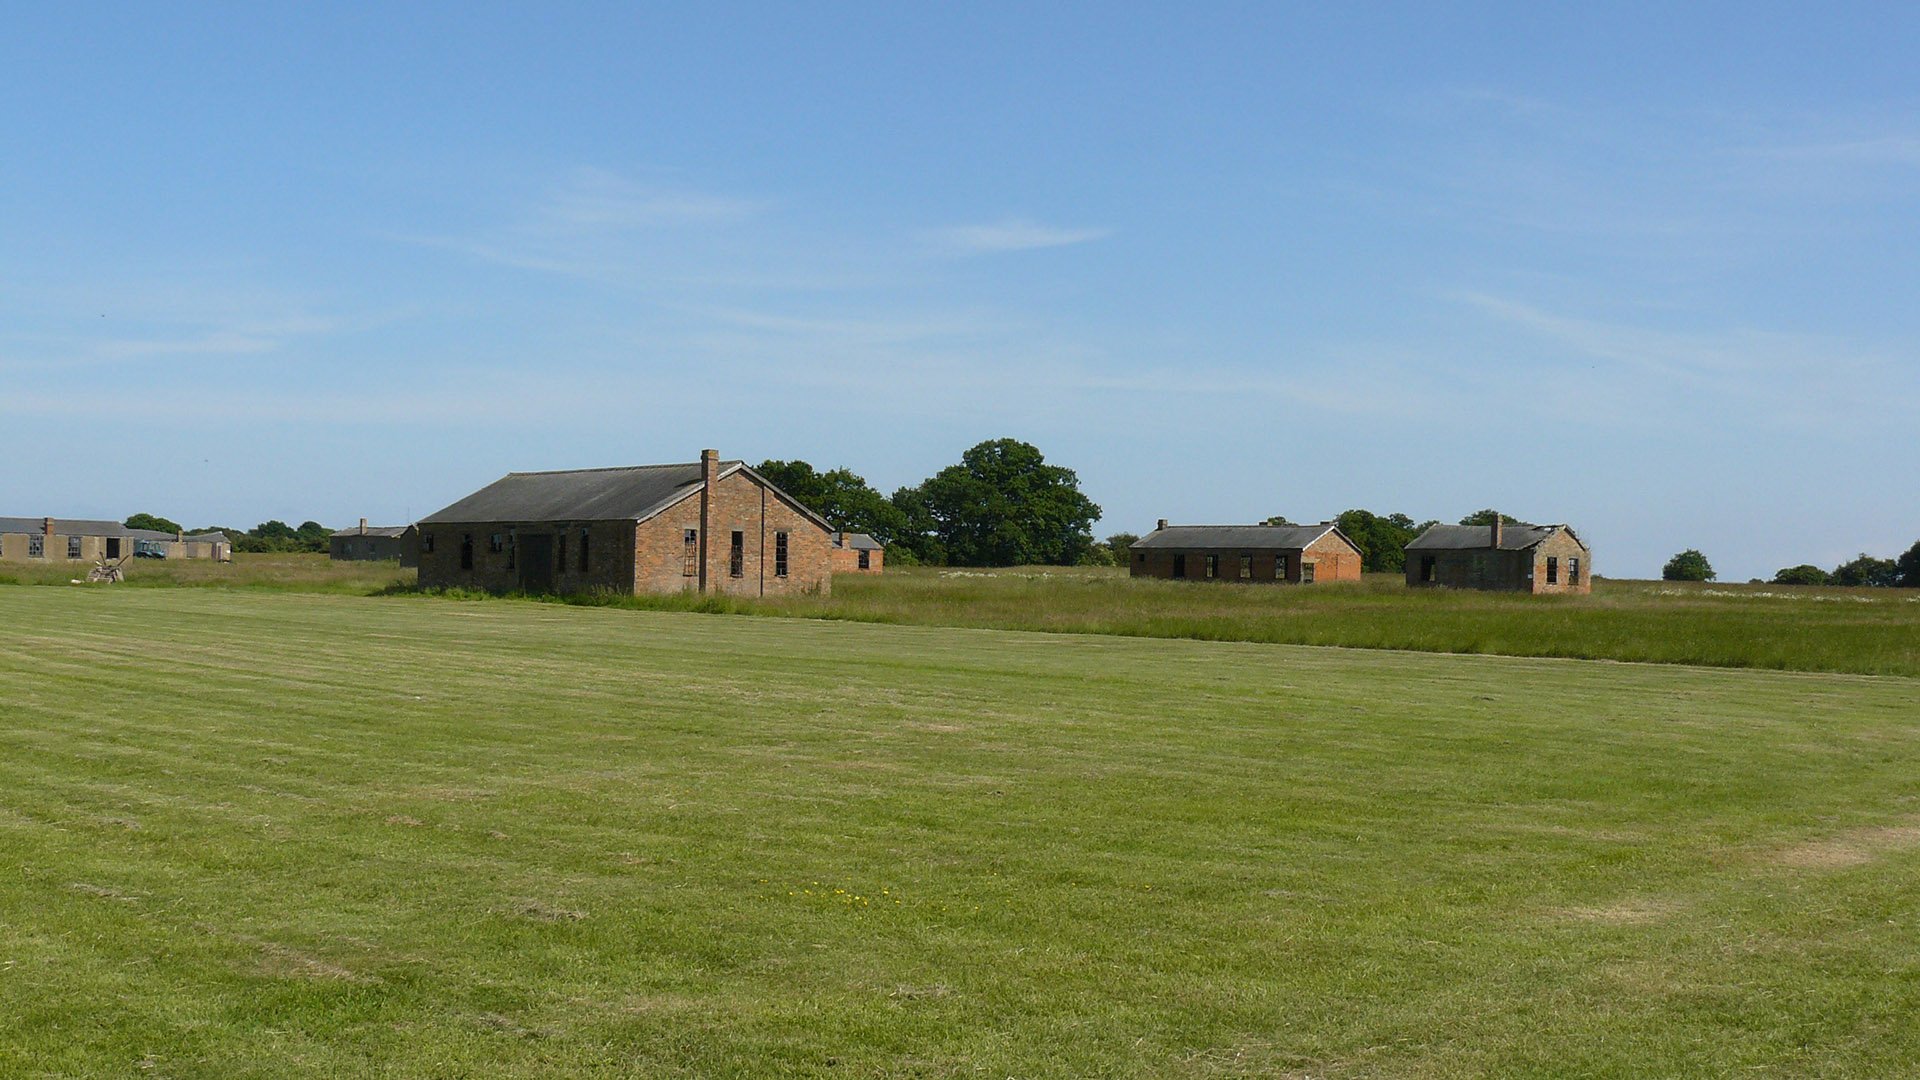 Stow Maries, Essex, is the best preserved First World War airfield in England and retains most of its buildings, all are listed Grade II*